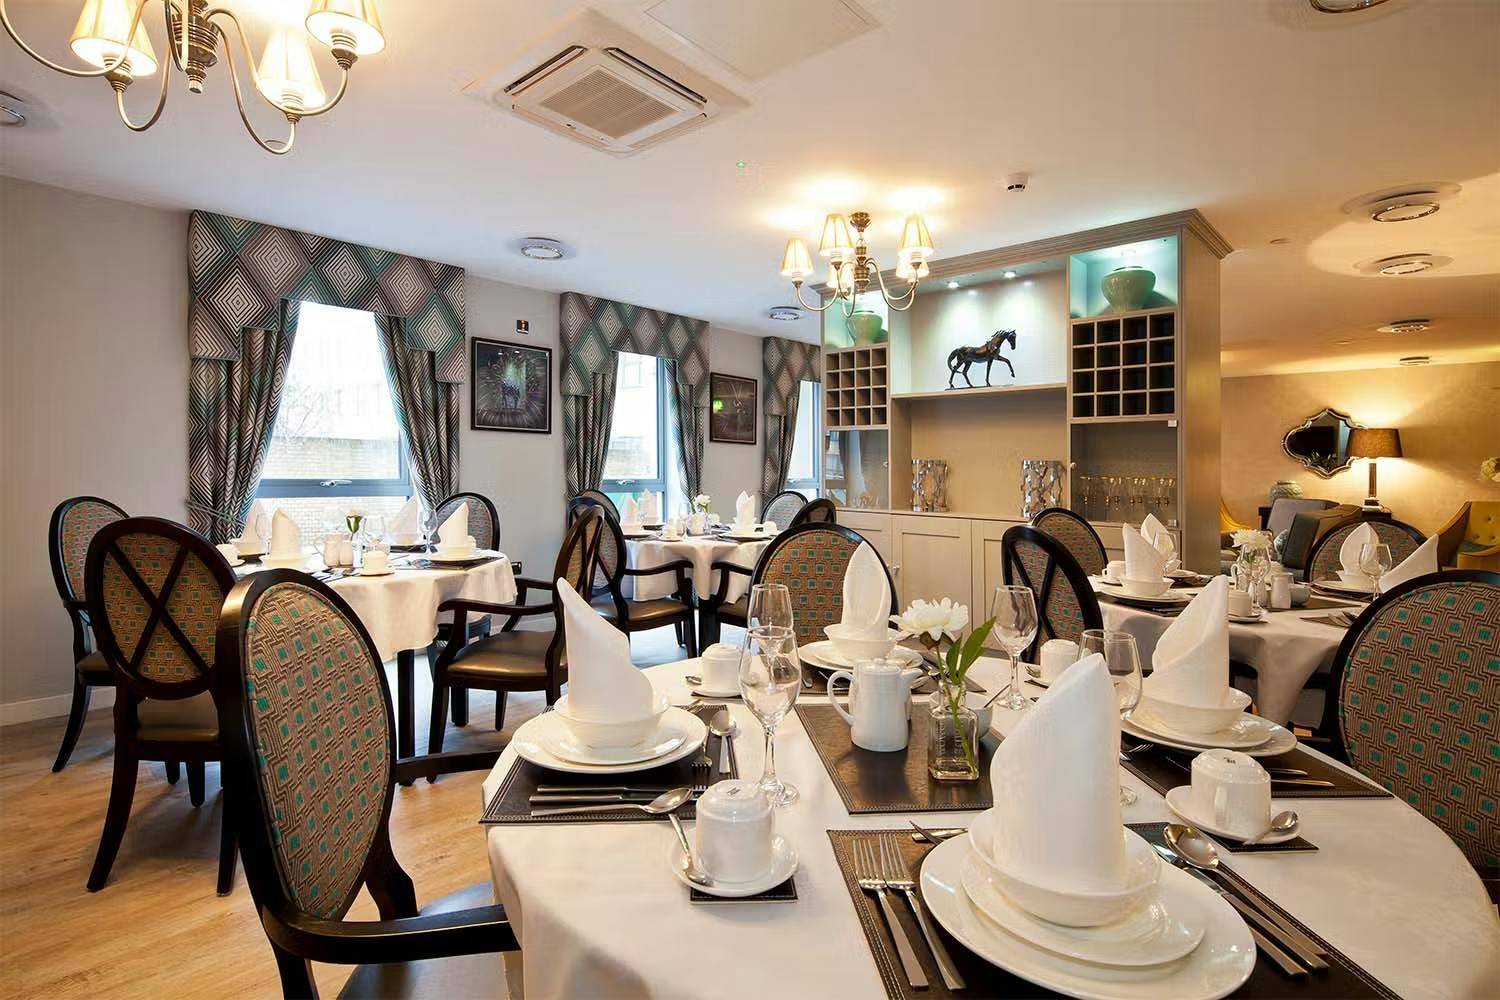 Dining area of Ty Llandaff care home in Cardiff, Wales